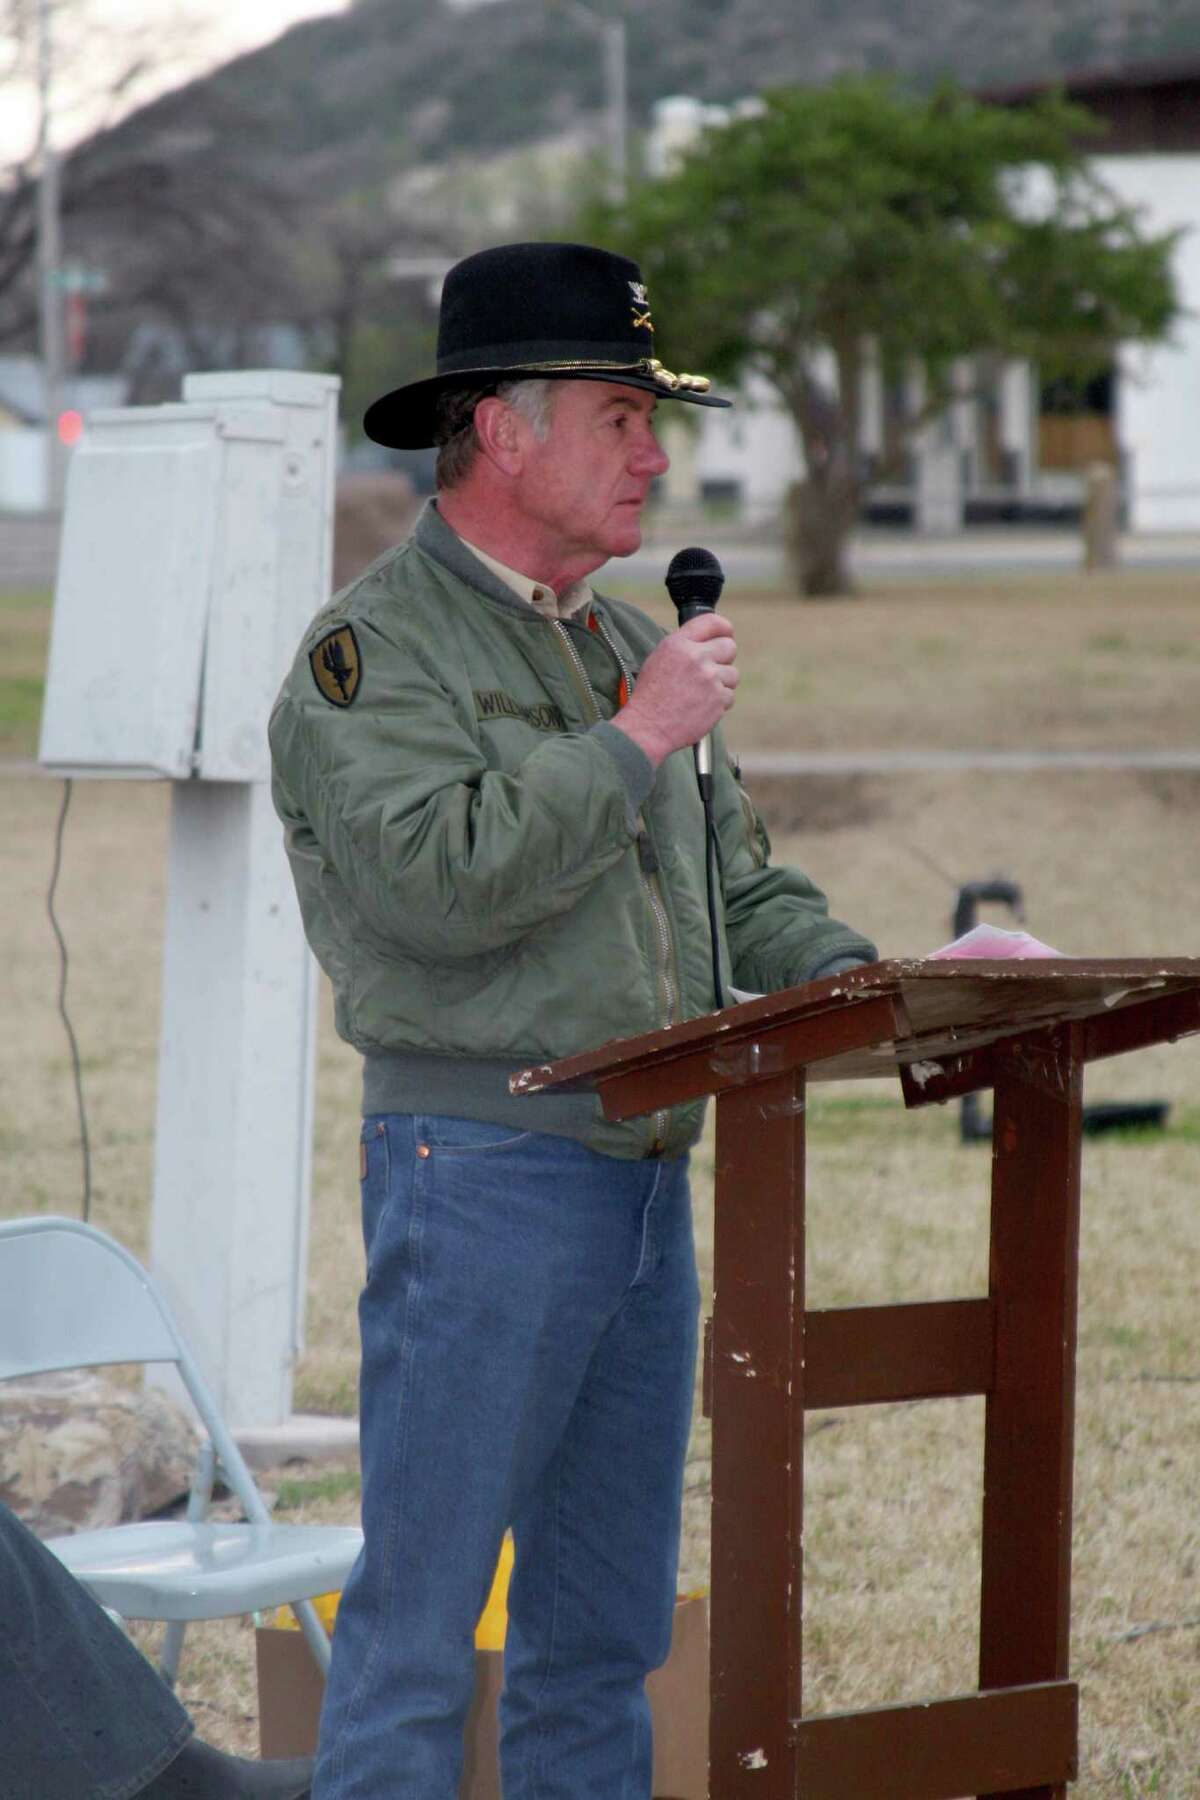 Herbert C. Williamson III was invited - as a professed Vietnam vet - to speak at this March 15 2010, event honoring veterans at the Kimble County Courthouse in Junction. Photo Courtesy of The Junction Eagle.